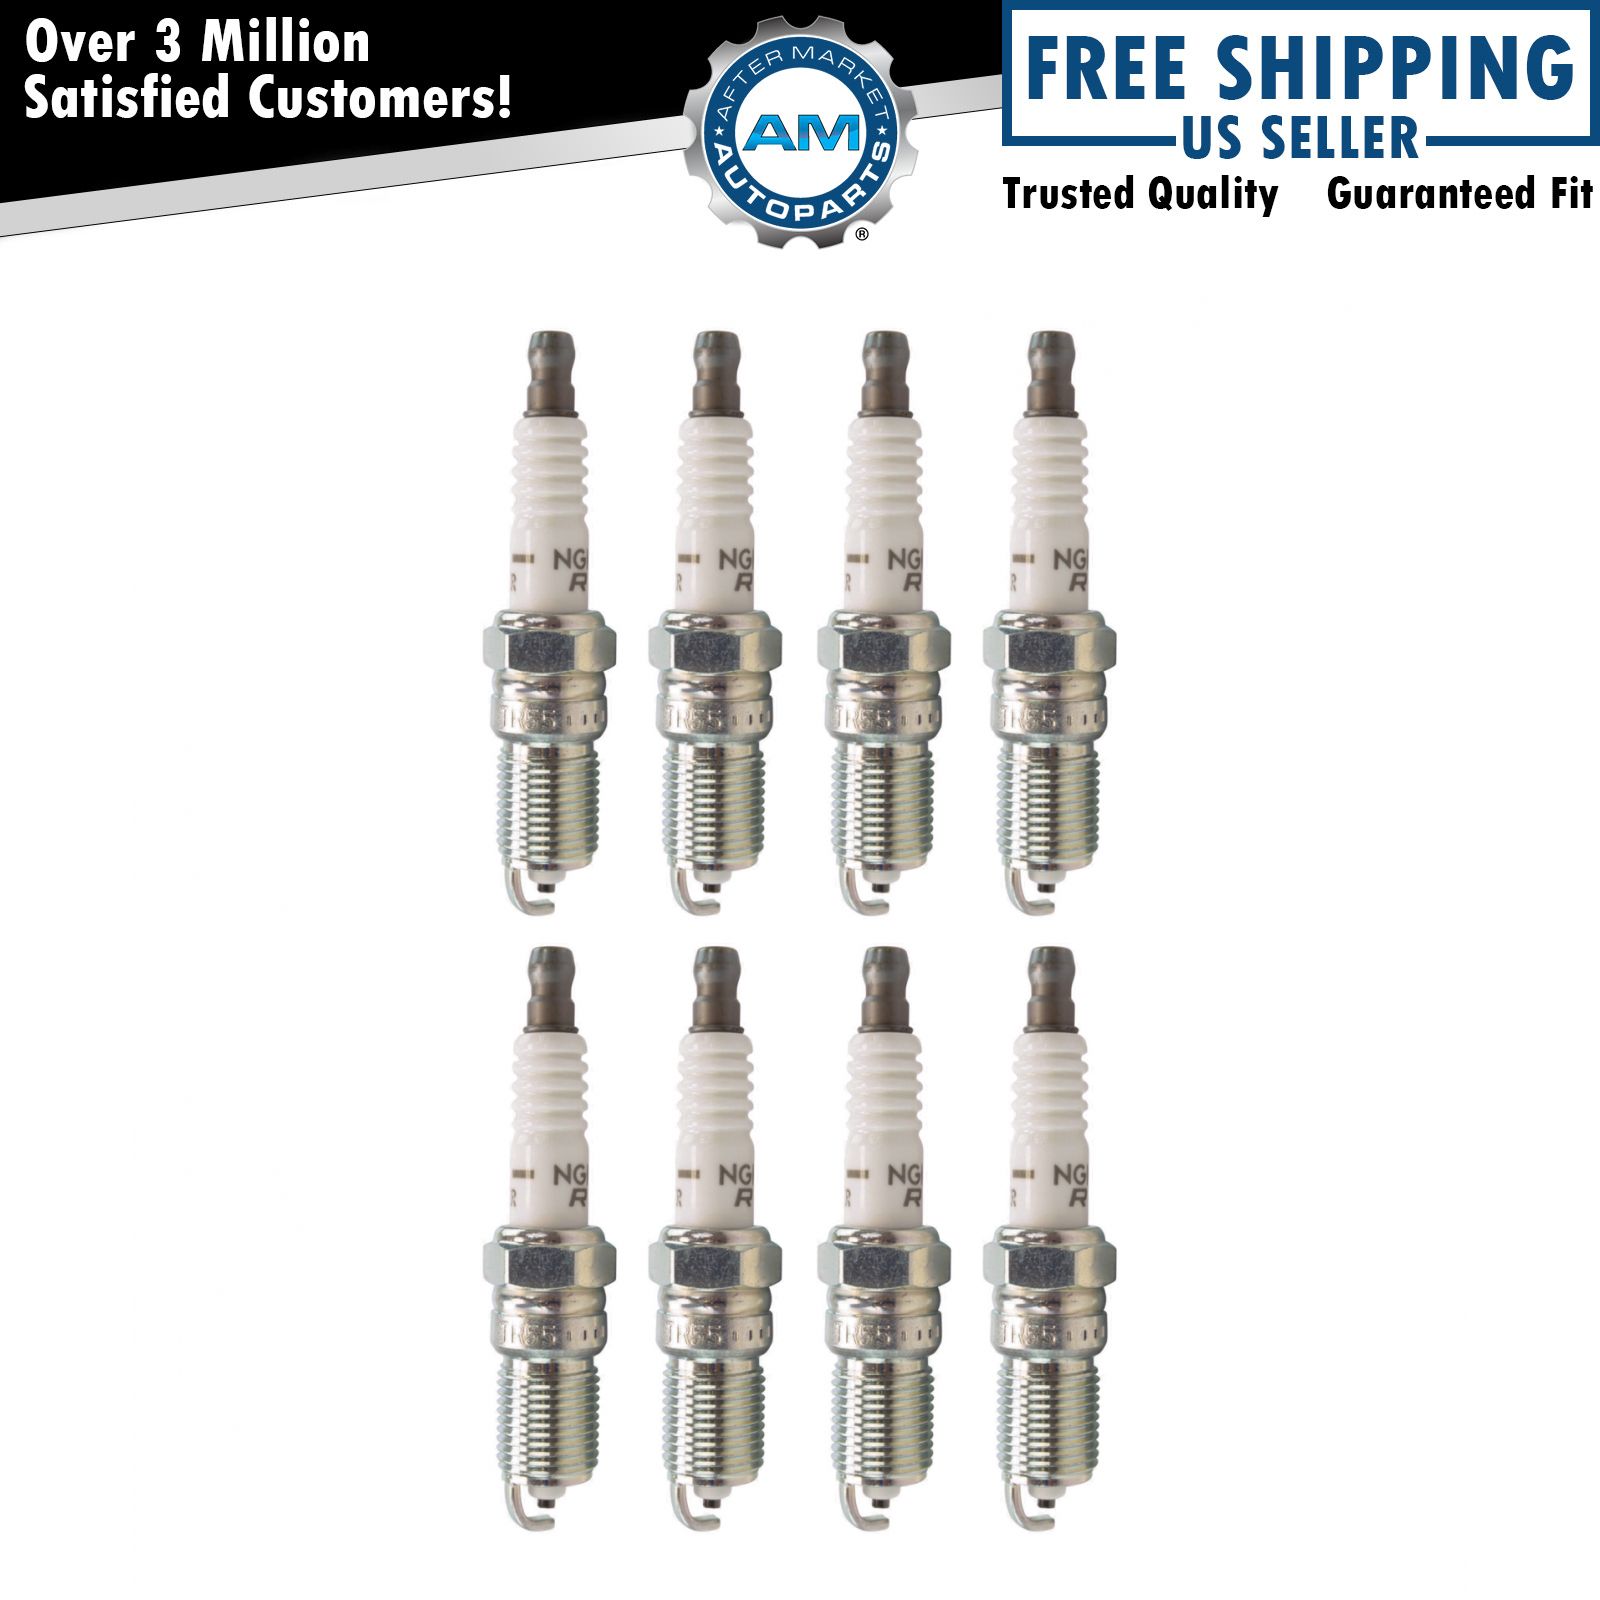 NGK 3951 V-Power Premium Plugs Set of 8 for Buick Cadillac Chevy GMC Ford Mazda